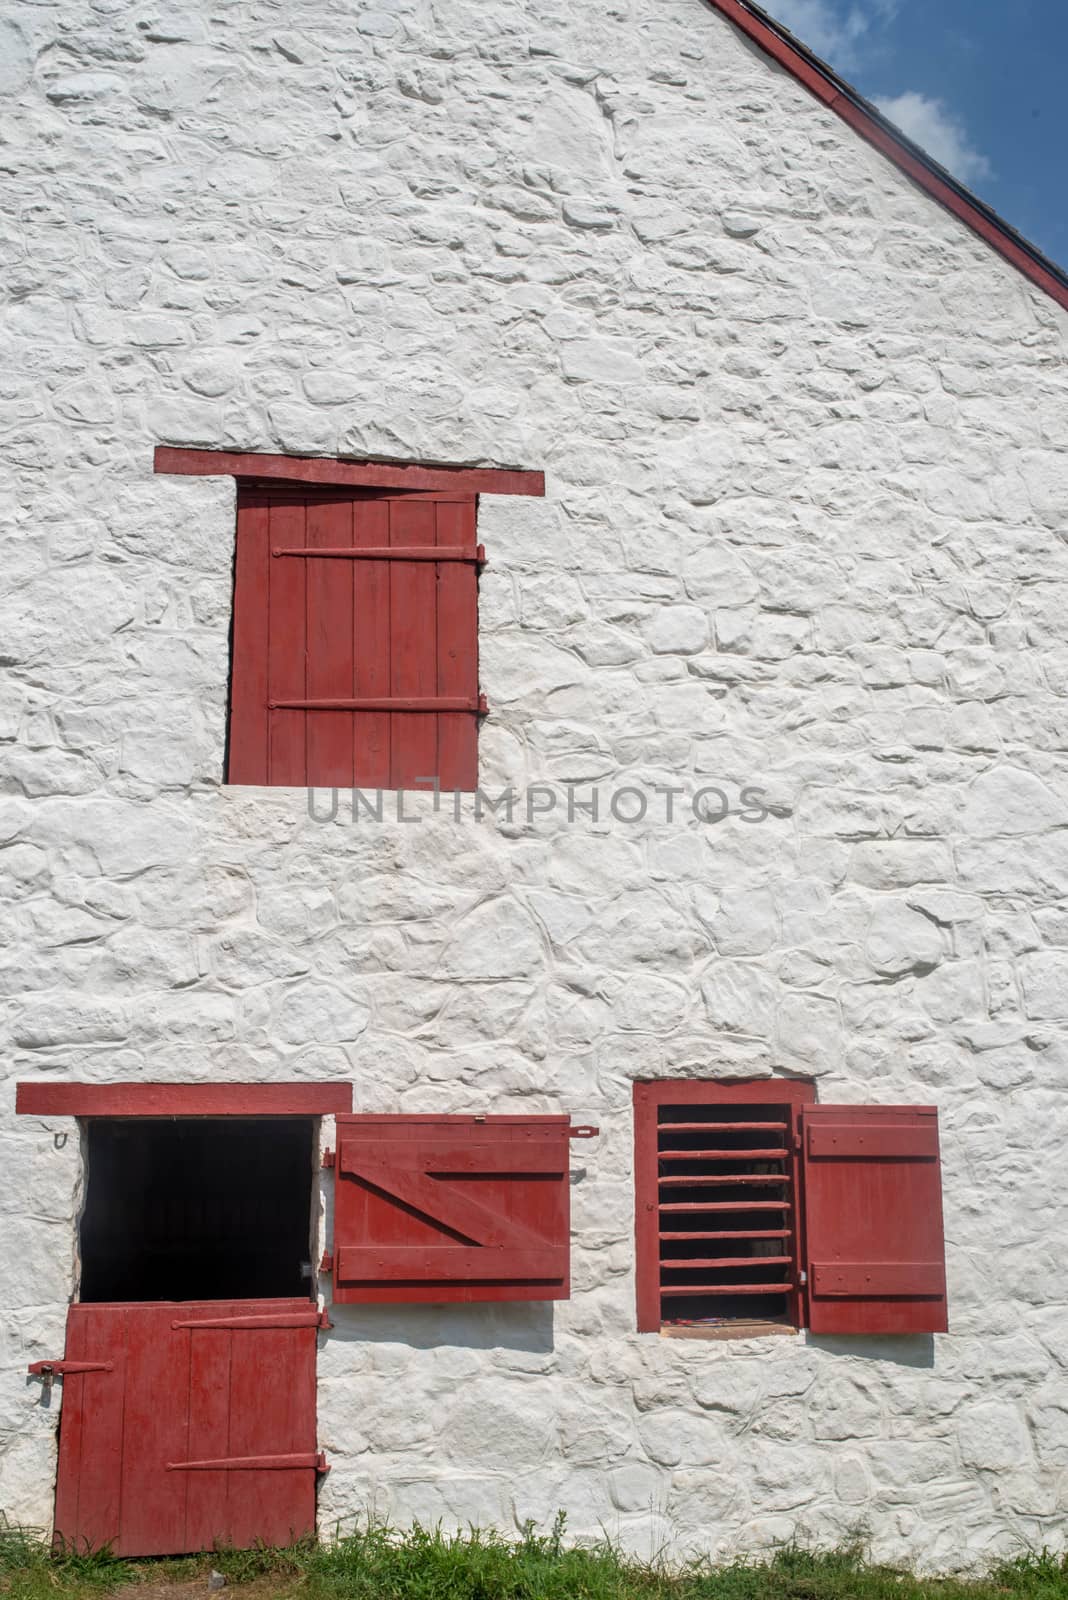 Full frame in natural light with copy space. Image shows red door, shutters, and slatted window on a whitewashed stone wall.